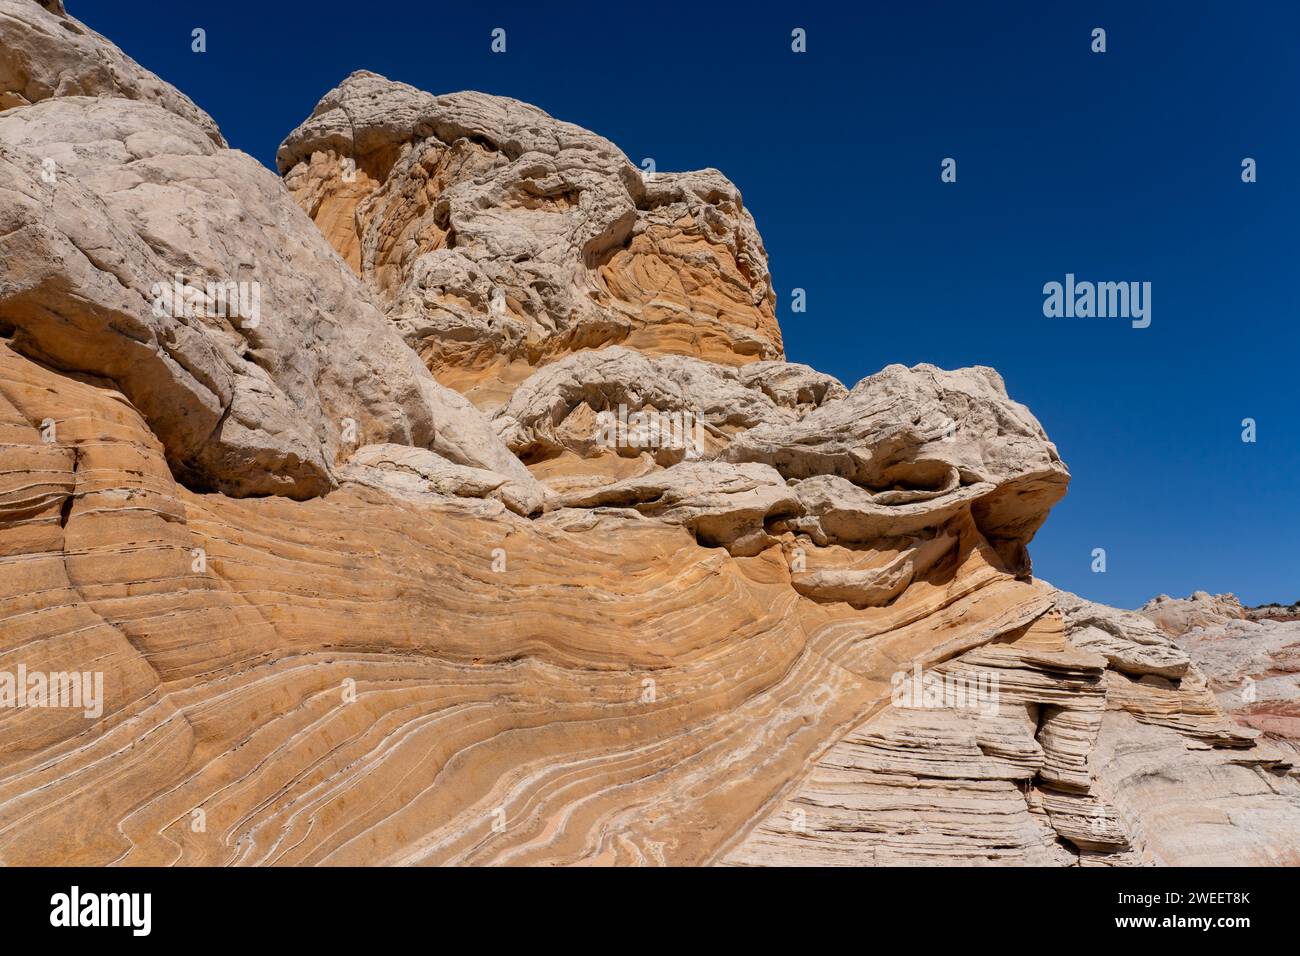 Eroded Navajo sandstone in the White Pocket Recreation Area, Vermilion Cliffs National Monument, Arizona.  Shown is a good example of cross-bedding in Stock Photo